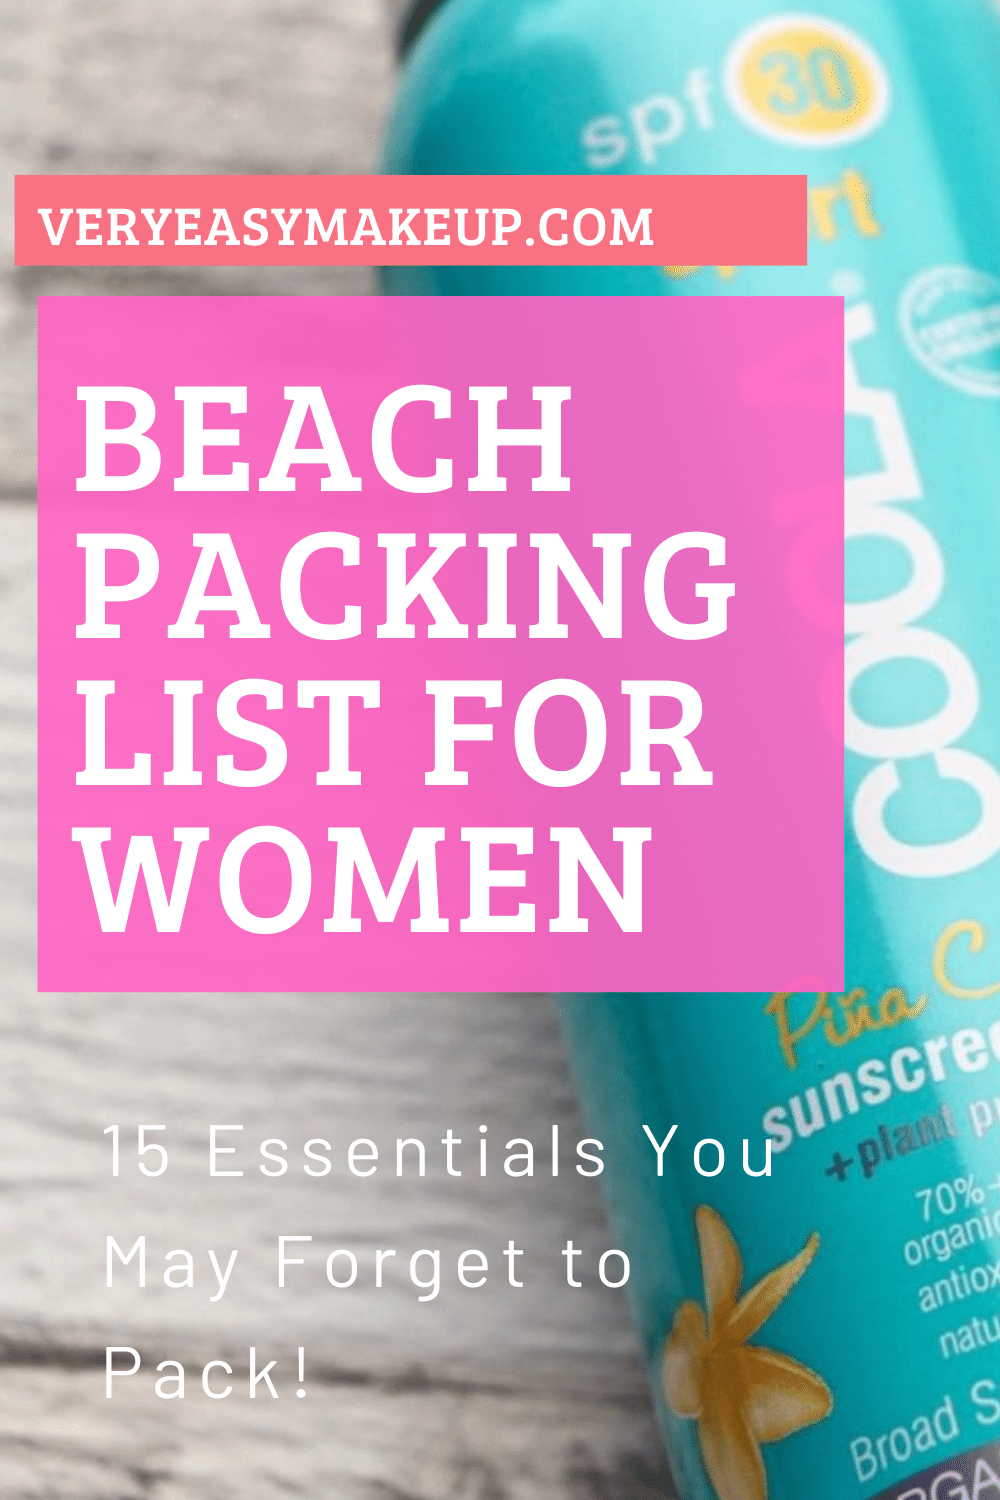 Beach Packing List for Women by Very Easy Makeup